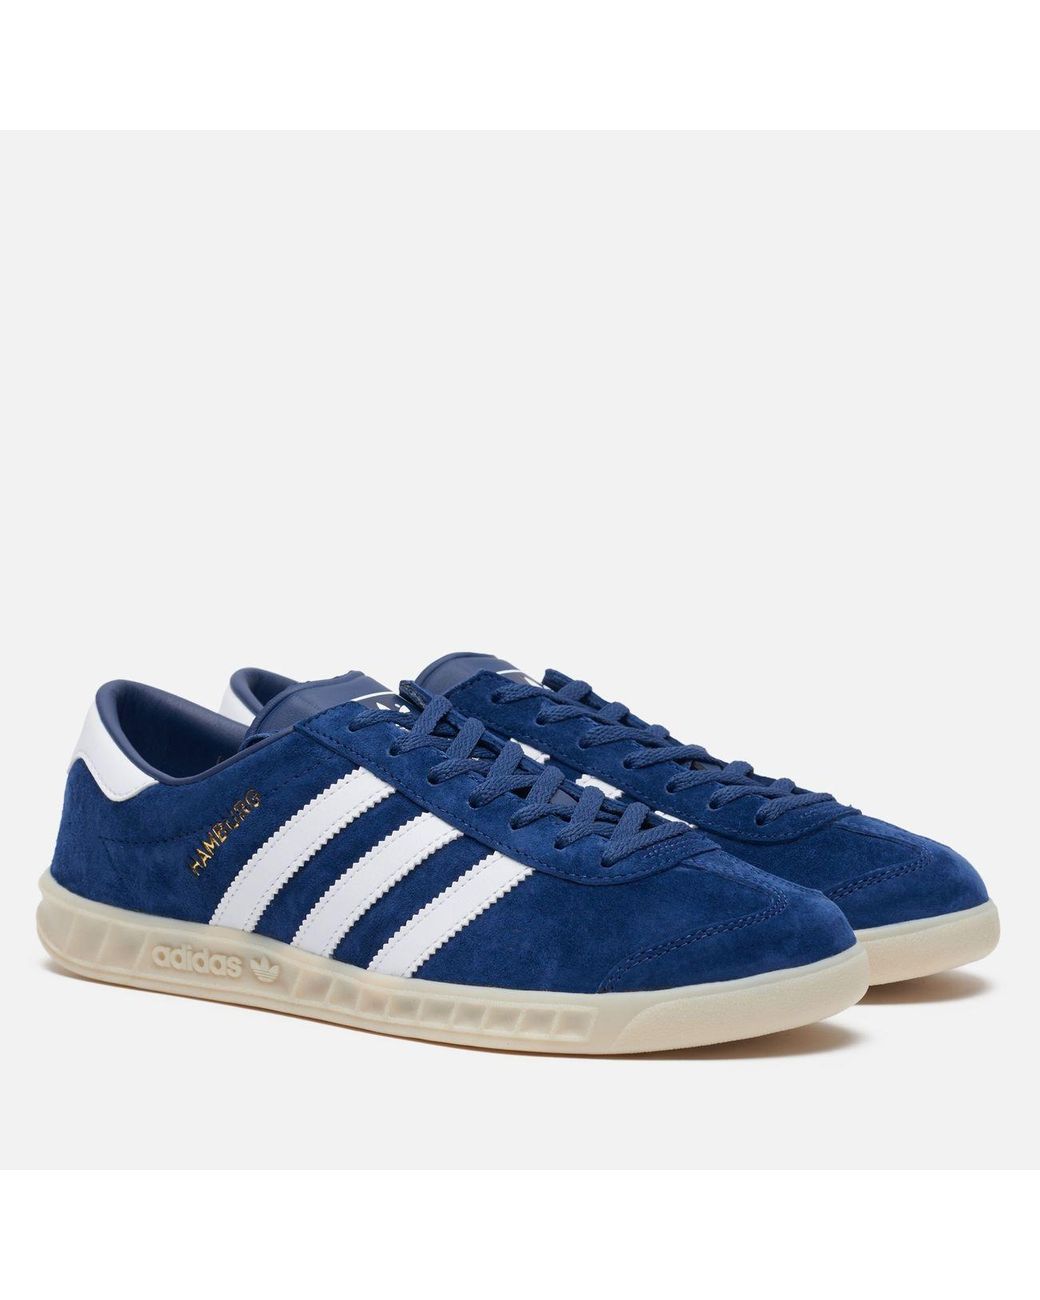 adidas Suede Hamburg Lace-up Sneakers in Blue for Men - Save 67% - Lyst